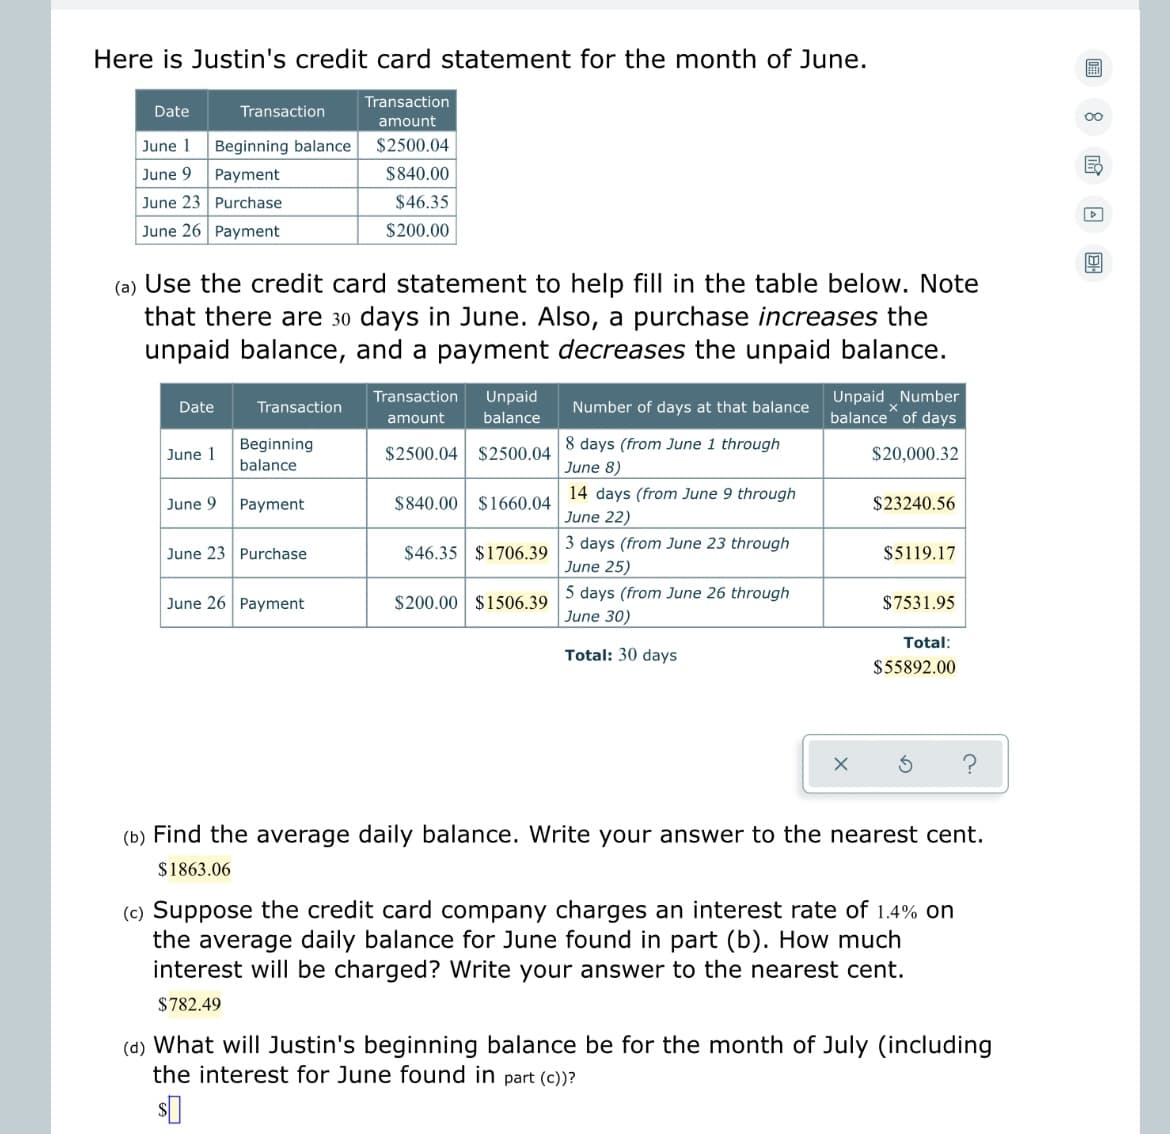 Here is Justin's credit card statement for the month of June.
Date
June 1
Beginning balance
June 9
Payment
June 23
Purchase
June 26 Payment
Date
Transaction
(a) Use the credit card statement to help fill in the table below. Note
that there are 30 days in June. Also, a purchase increases the
unpaid balance, and a payment decreases the unpaid balance.
June 1
June 9
Transaction
Beginning
balance
Payment
June 23 Purchase
Transaction
amount
$2500.04
$840.00
$46.35
$200.00
June 26 Payment
amount
Transaction Unpaid
balance
$2500.04 $2500.04
$840.00 $1660.04
$46.35 $1706.39
$200.00 $1506.39
Number of days at that balance
8 days (from June 1 through
June 8)
14 days (from June 9 through
June 22)
3 days (from June 23 through
June 25)
5 days (from June 26 through
June 30)
Total: 30 days
Unpaid Number
balance of days
$20,000.32
$23240.56
$5119.17
$7531.95
Total:
$55892.00
(b) Find the average daily balance. Write your answer to the nearest cent.
$1863.06
(c) Suppose the credit card company charges an interest rate of 1.4% on
the average daily balance for June found in part (b). How much
interest will be charged? Write your answer to the nearest cent.
$782.49
(d) What will Justin's beginning balance be for the month of July (including
the interest for June found in part (c))?
圃
8
Ed
▷
B